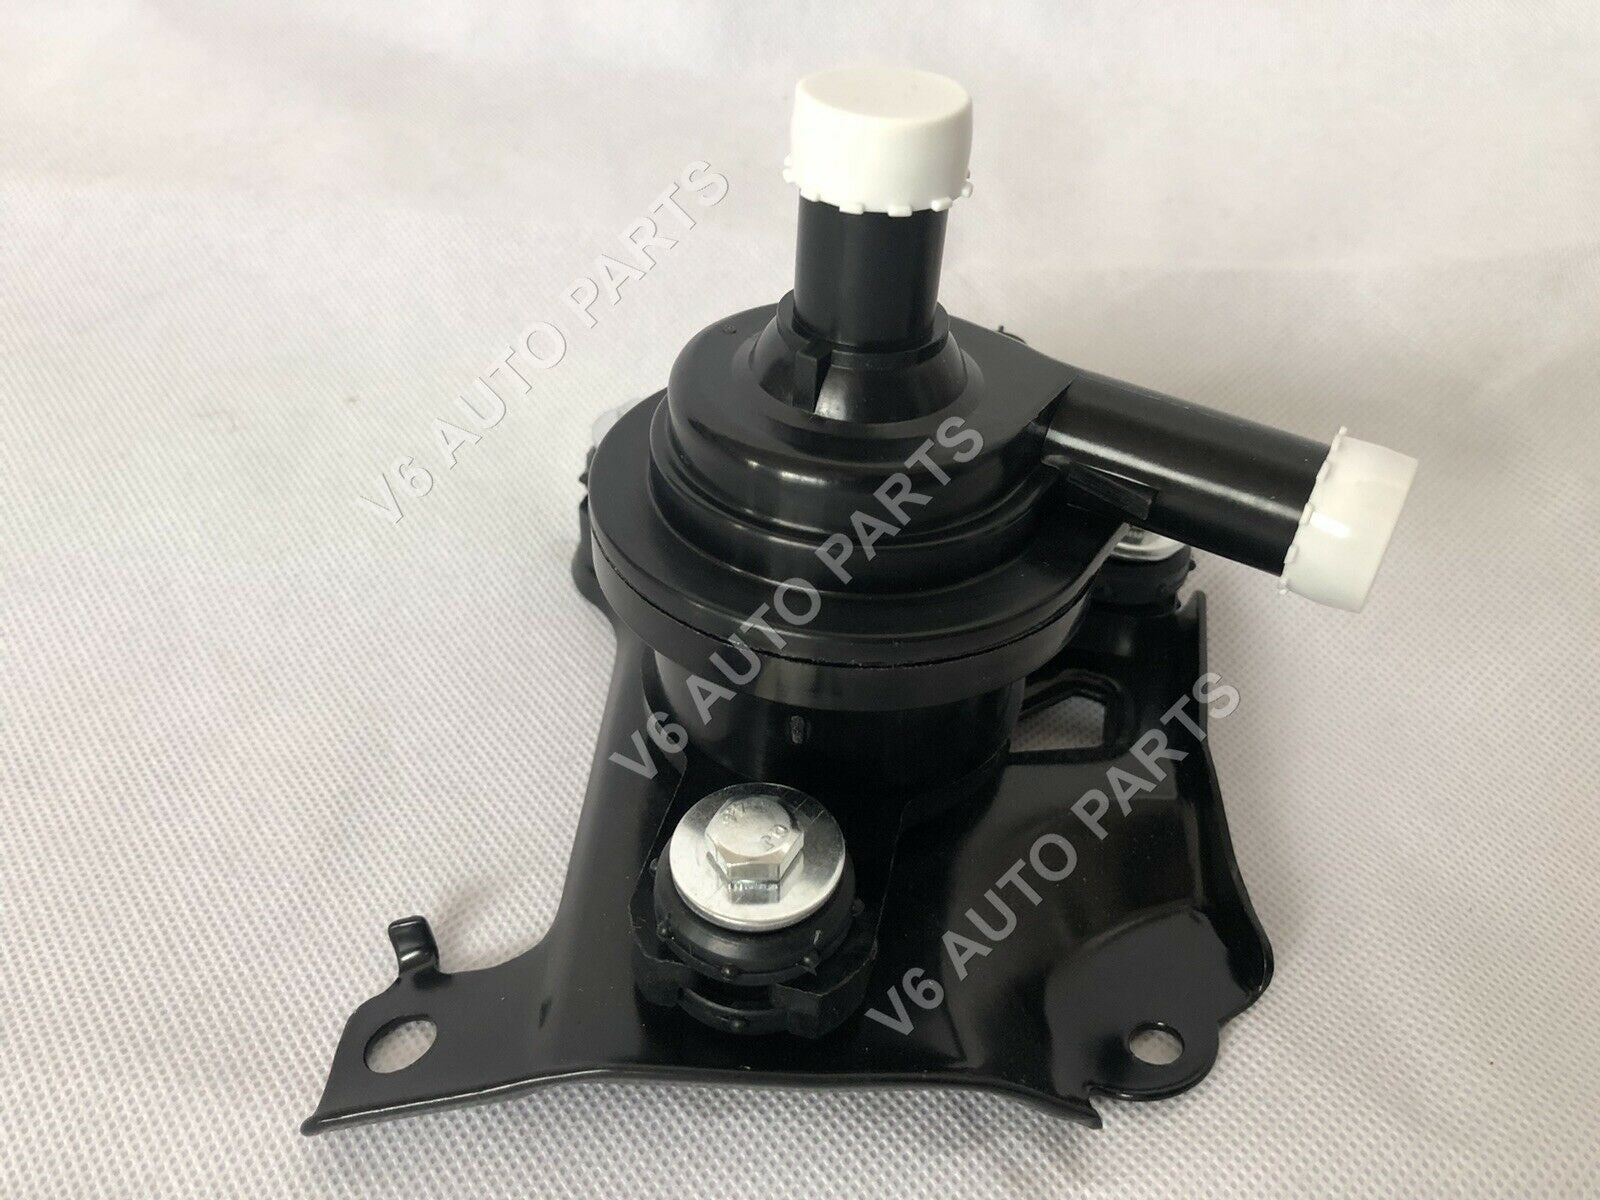 04000-32528 Electric Inverter Cooling Water Pump For 2004 - 2009 Toyota Prius Hybrid